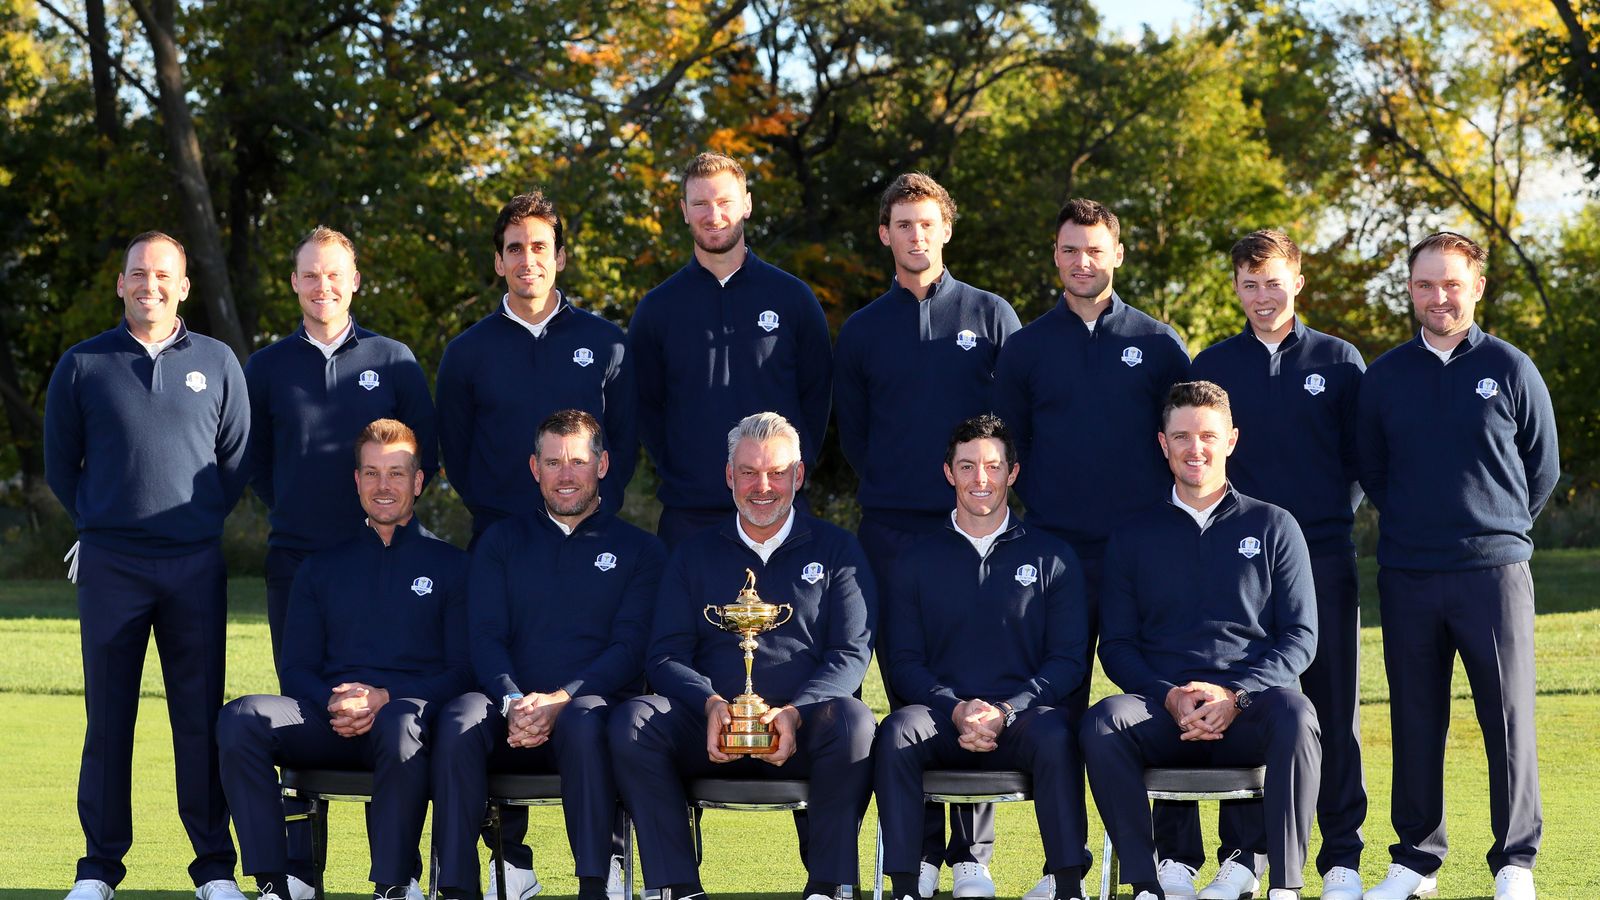 Sergio Garcia happy to pair with anyone in Europe's Ryder Cup side ...